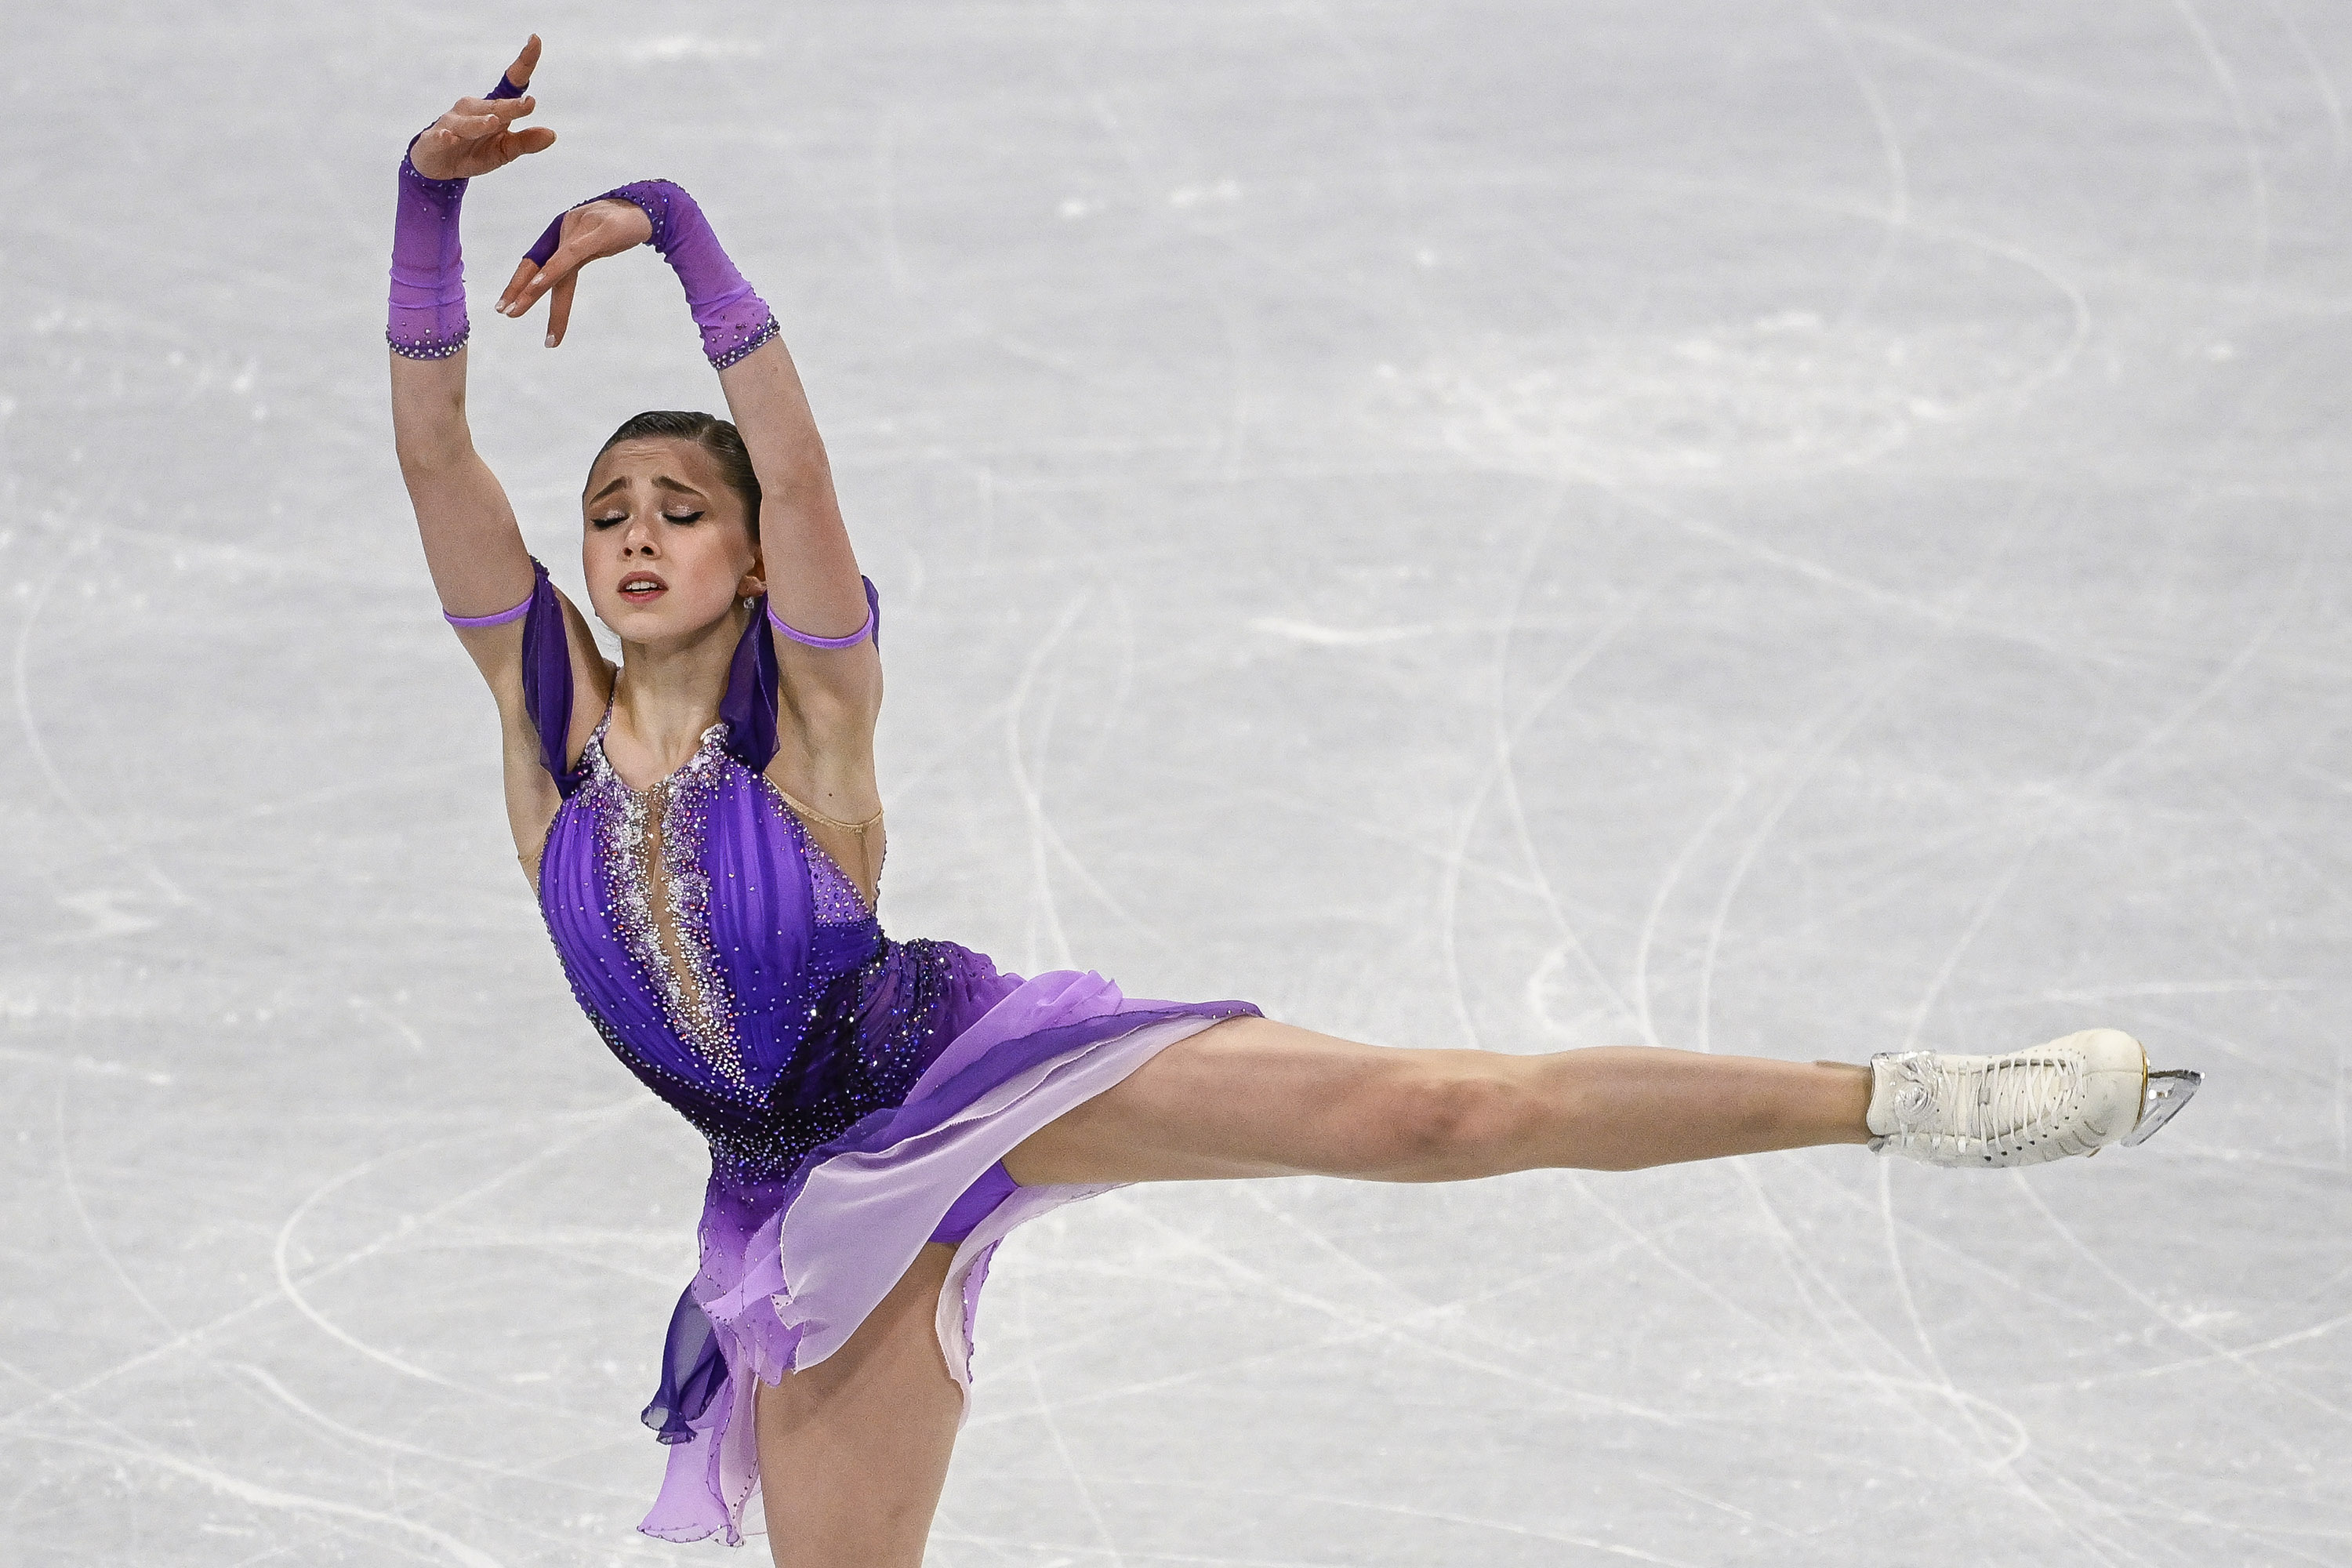 Team ROC’s Kamila Valieva performs during the short program of the women's figure skating competition on Tuesday.